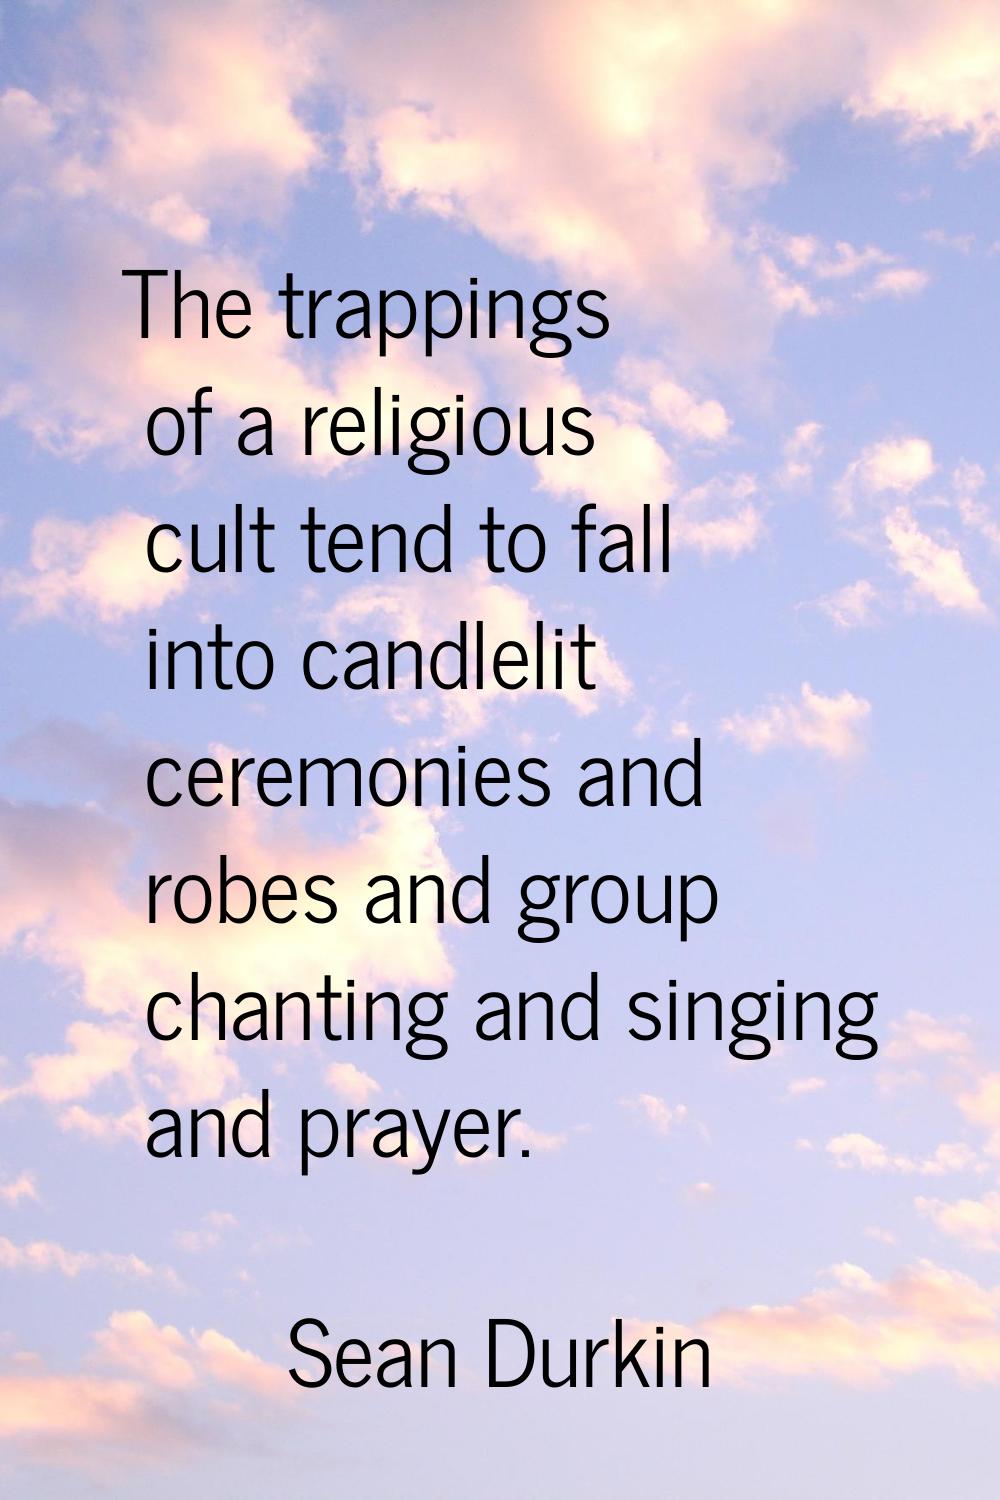 The trappings of a religious cult tend to fall into candlelit ceremonies and robes and group chanti